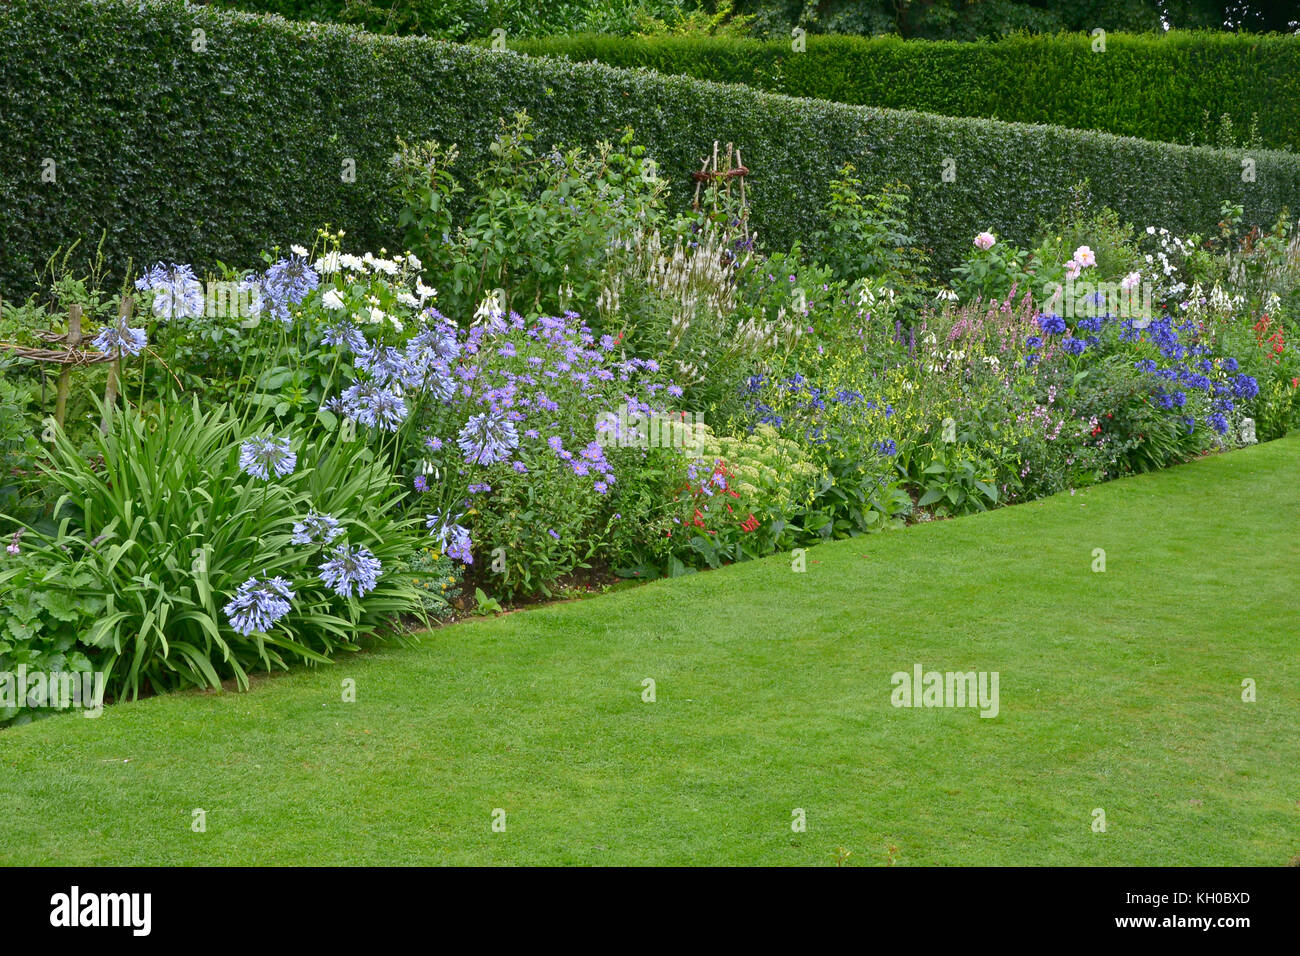 A garden flower border with mixed planting including Agapanthus, Asters,  Veronicastrum and Dahlias Stock Photo - Alamy